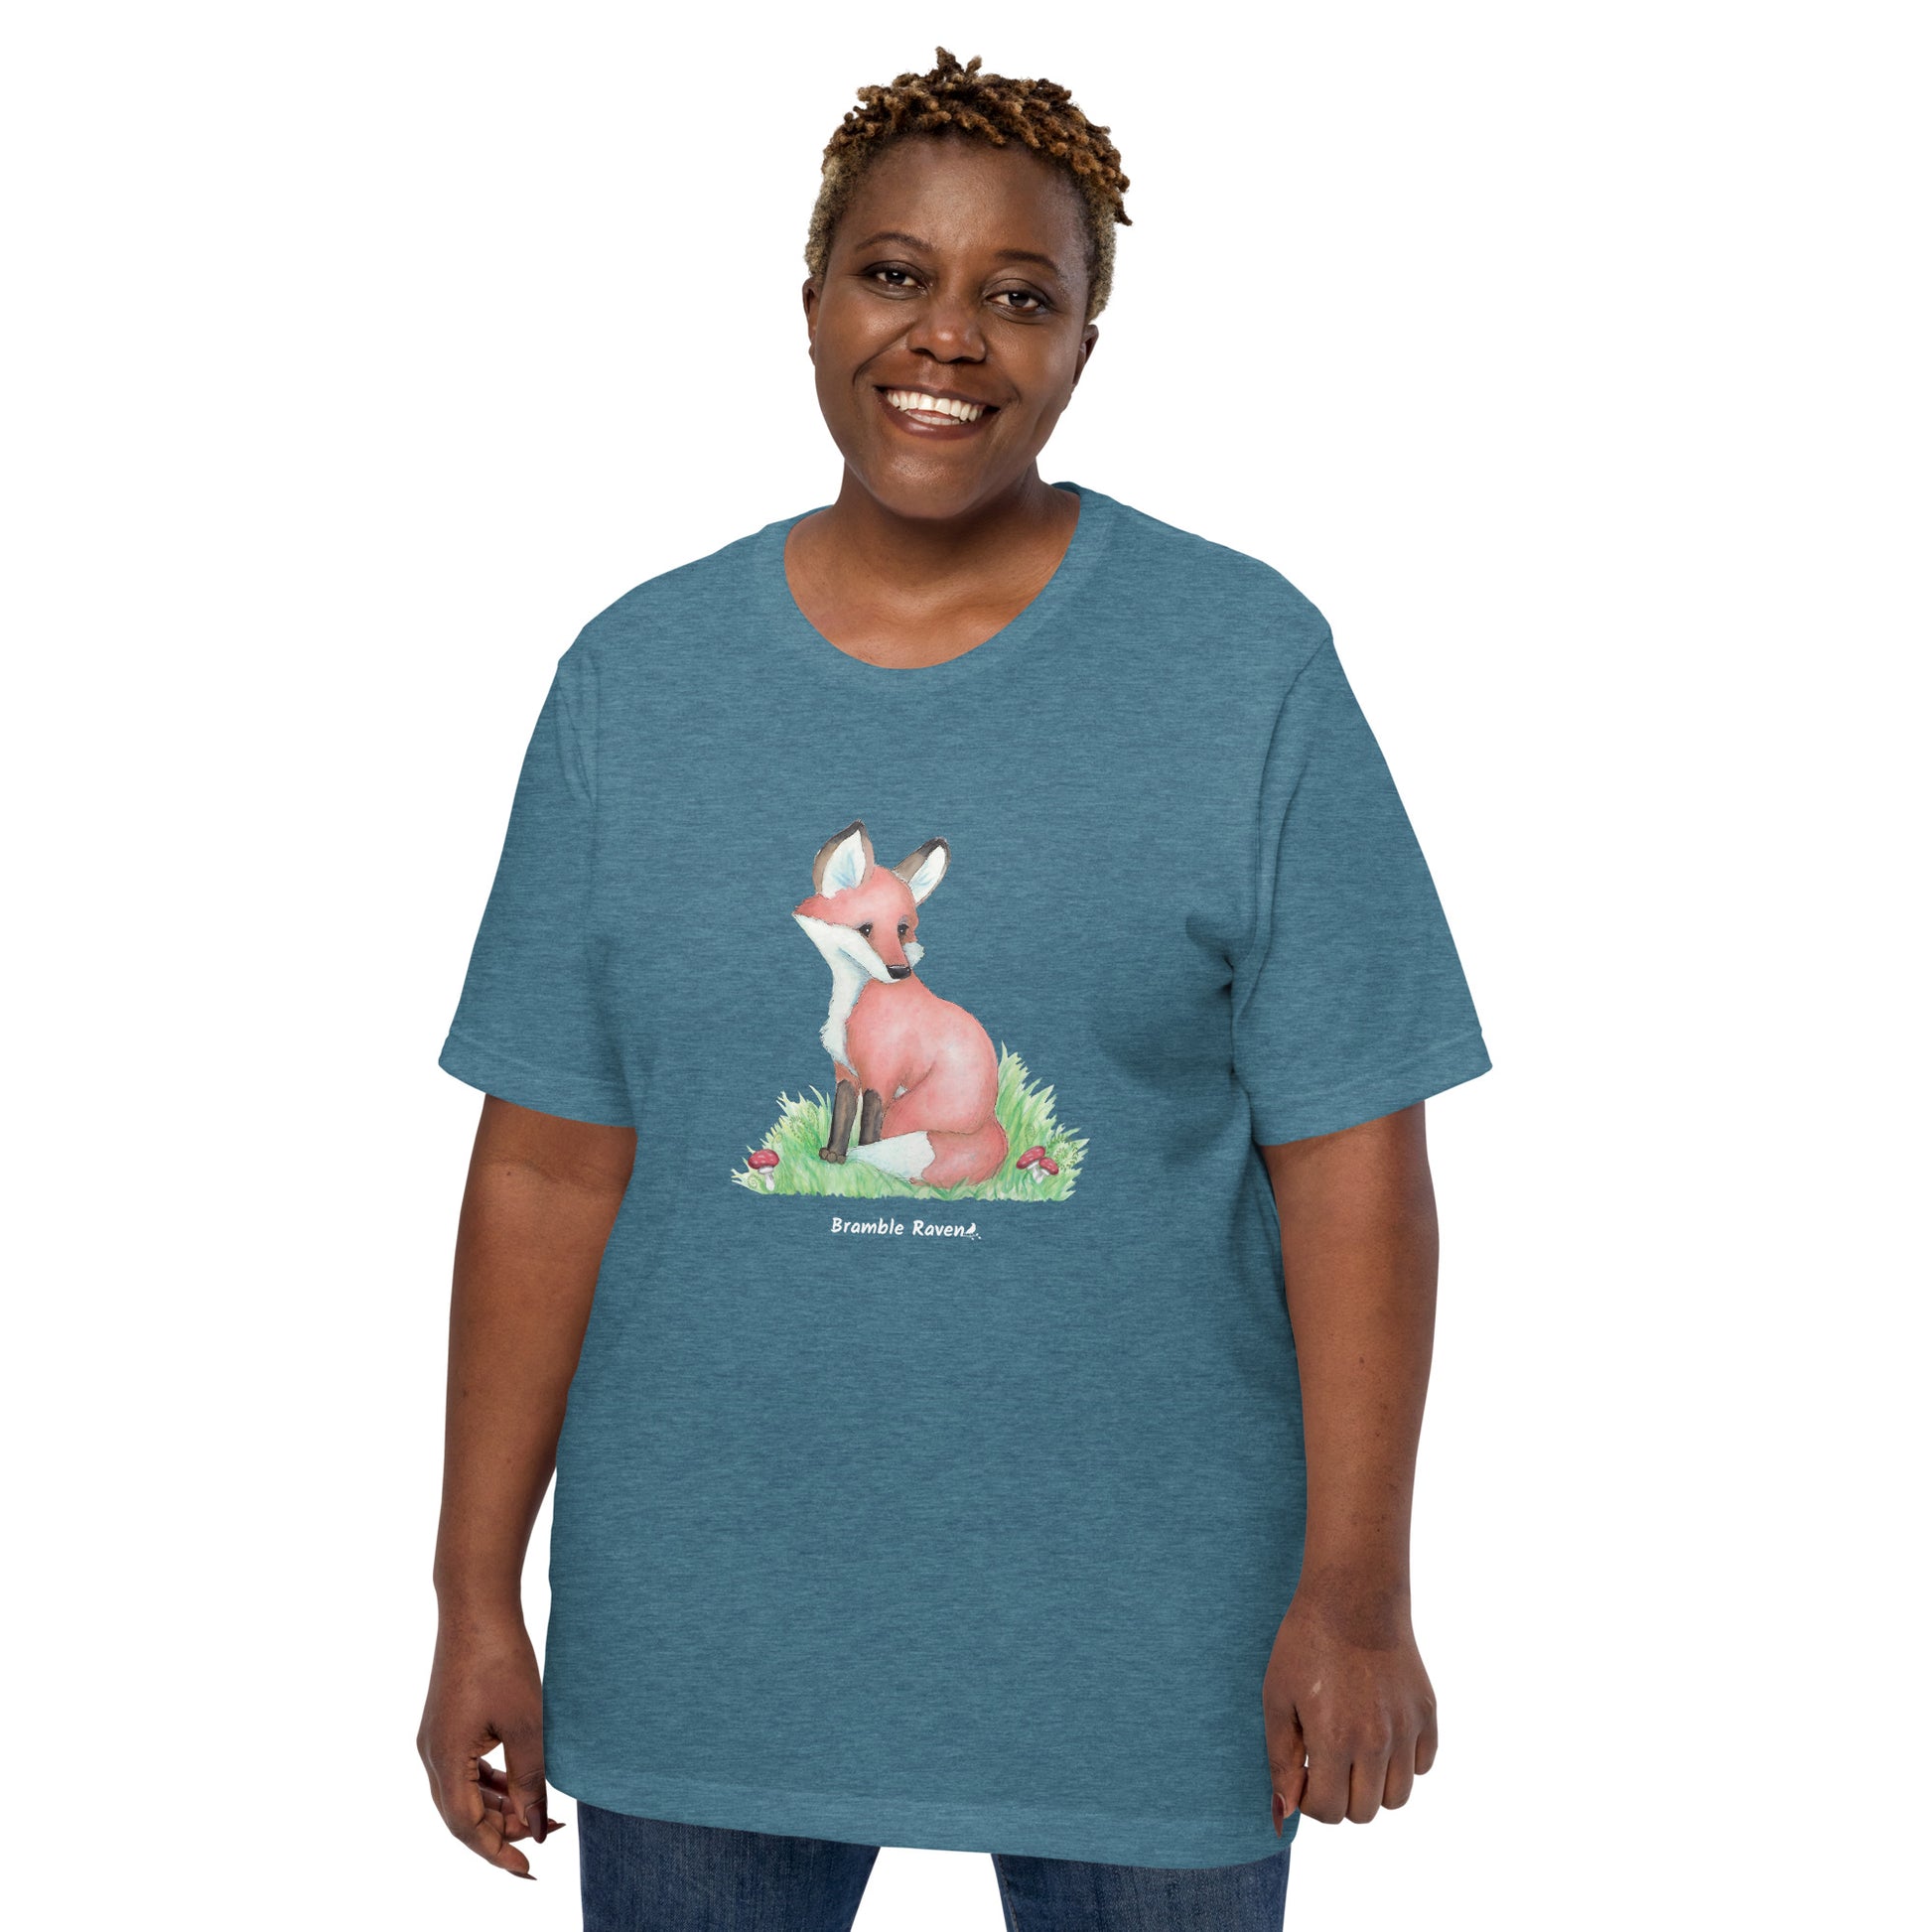 Unisex heather deep teal colored forest fox t-shirt. Features watercolor print of a fox in the grass surrounded by mushrooms and ferns. Shown on female model.